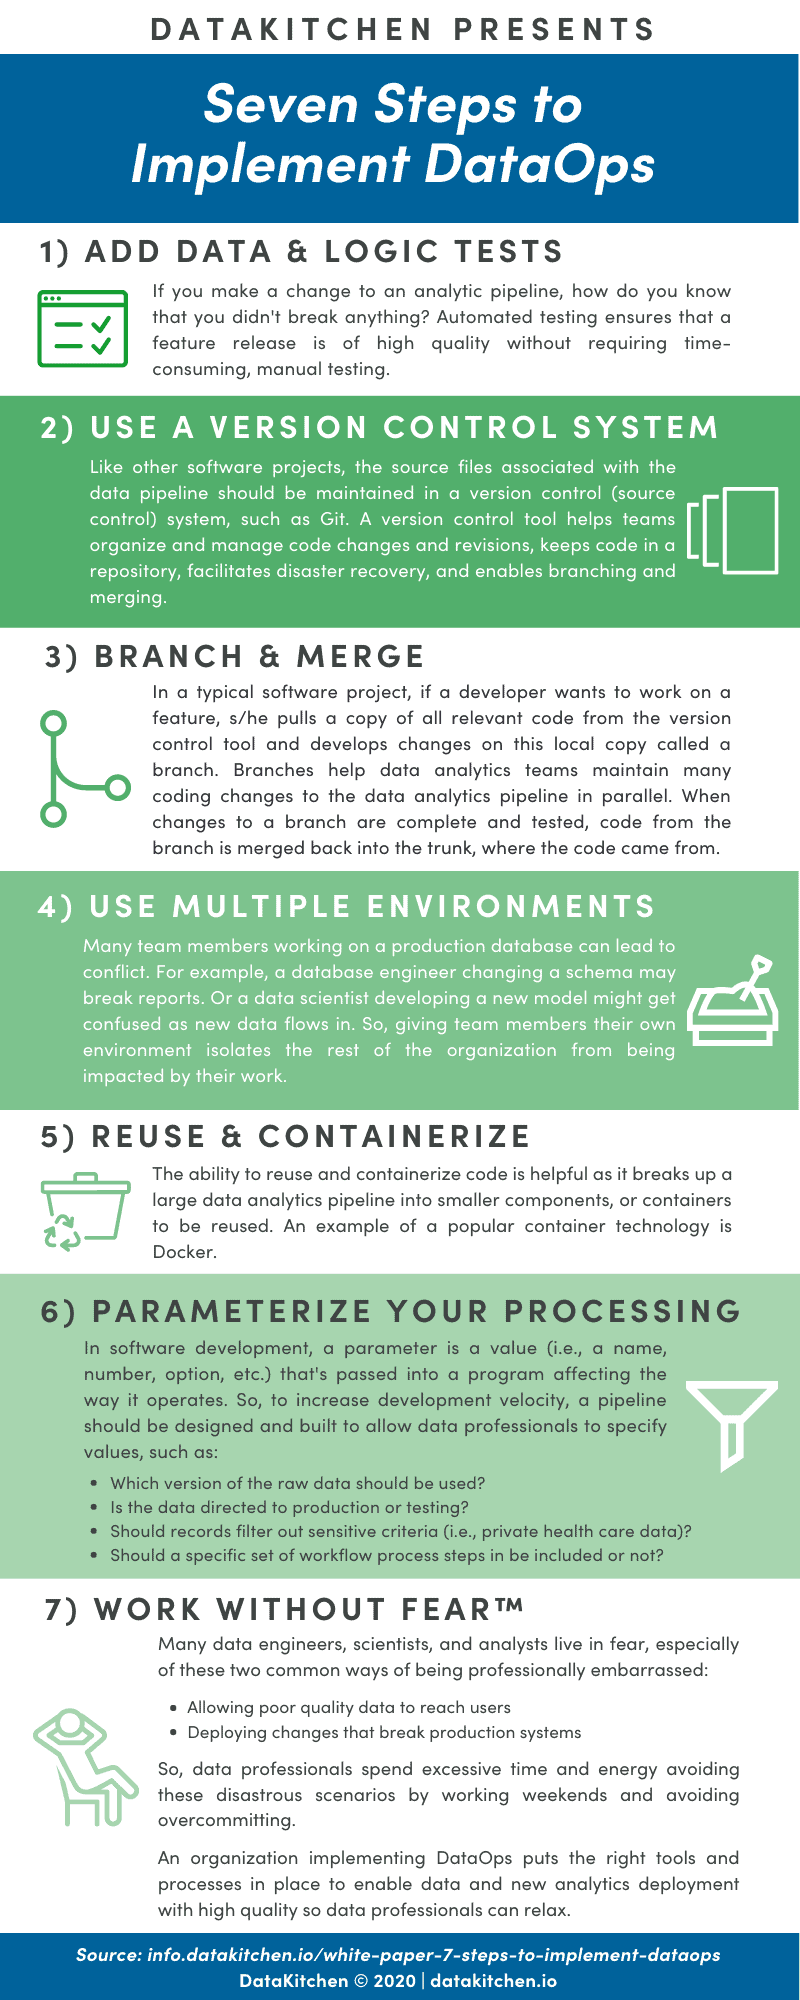 DataKitchen Infographic 7 Steps to Implement DataOps